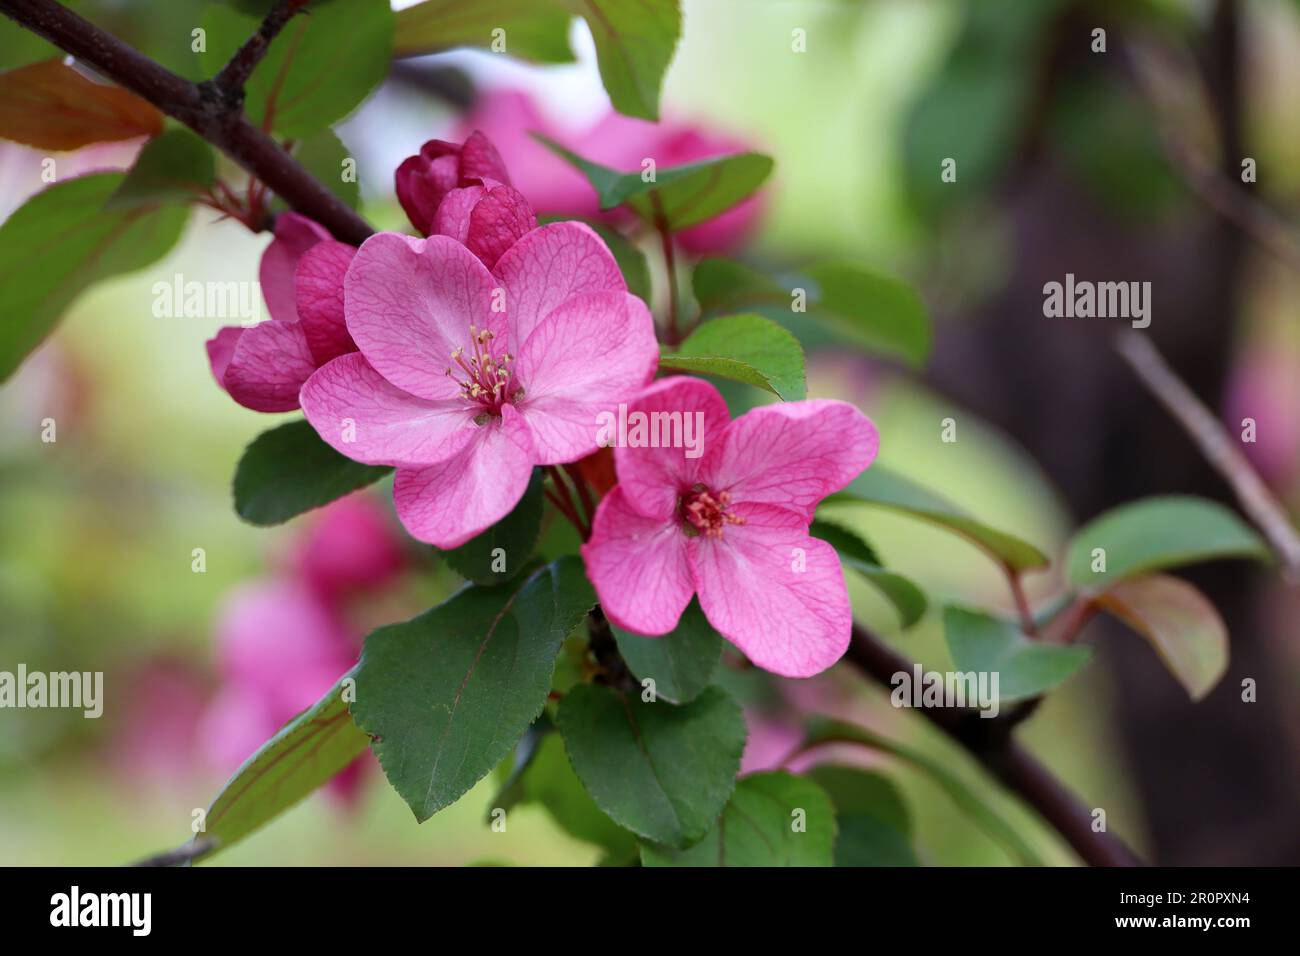 Apple blossom on a branch in spring garden. Red flowers with green leaves Stock Photo